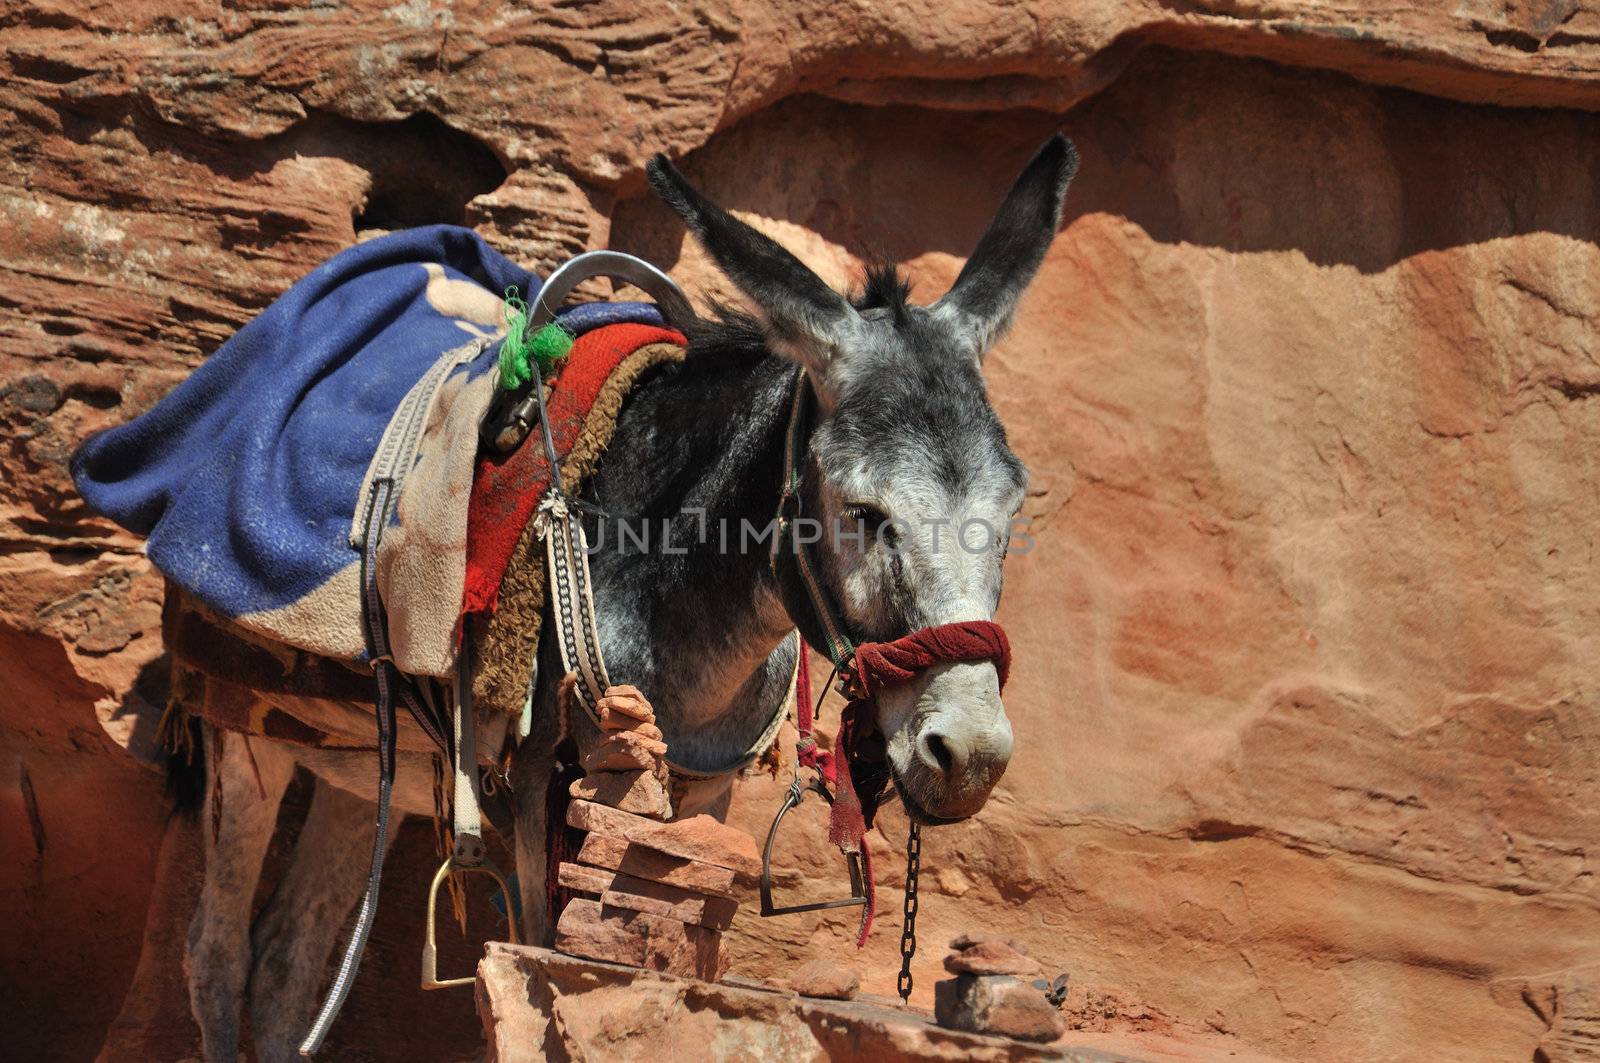 In the world are many places where you need another trasport than car - donkey. This is in archelogical site at Petra in Jordan.